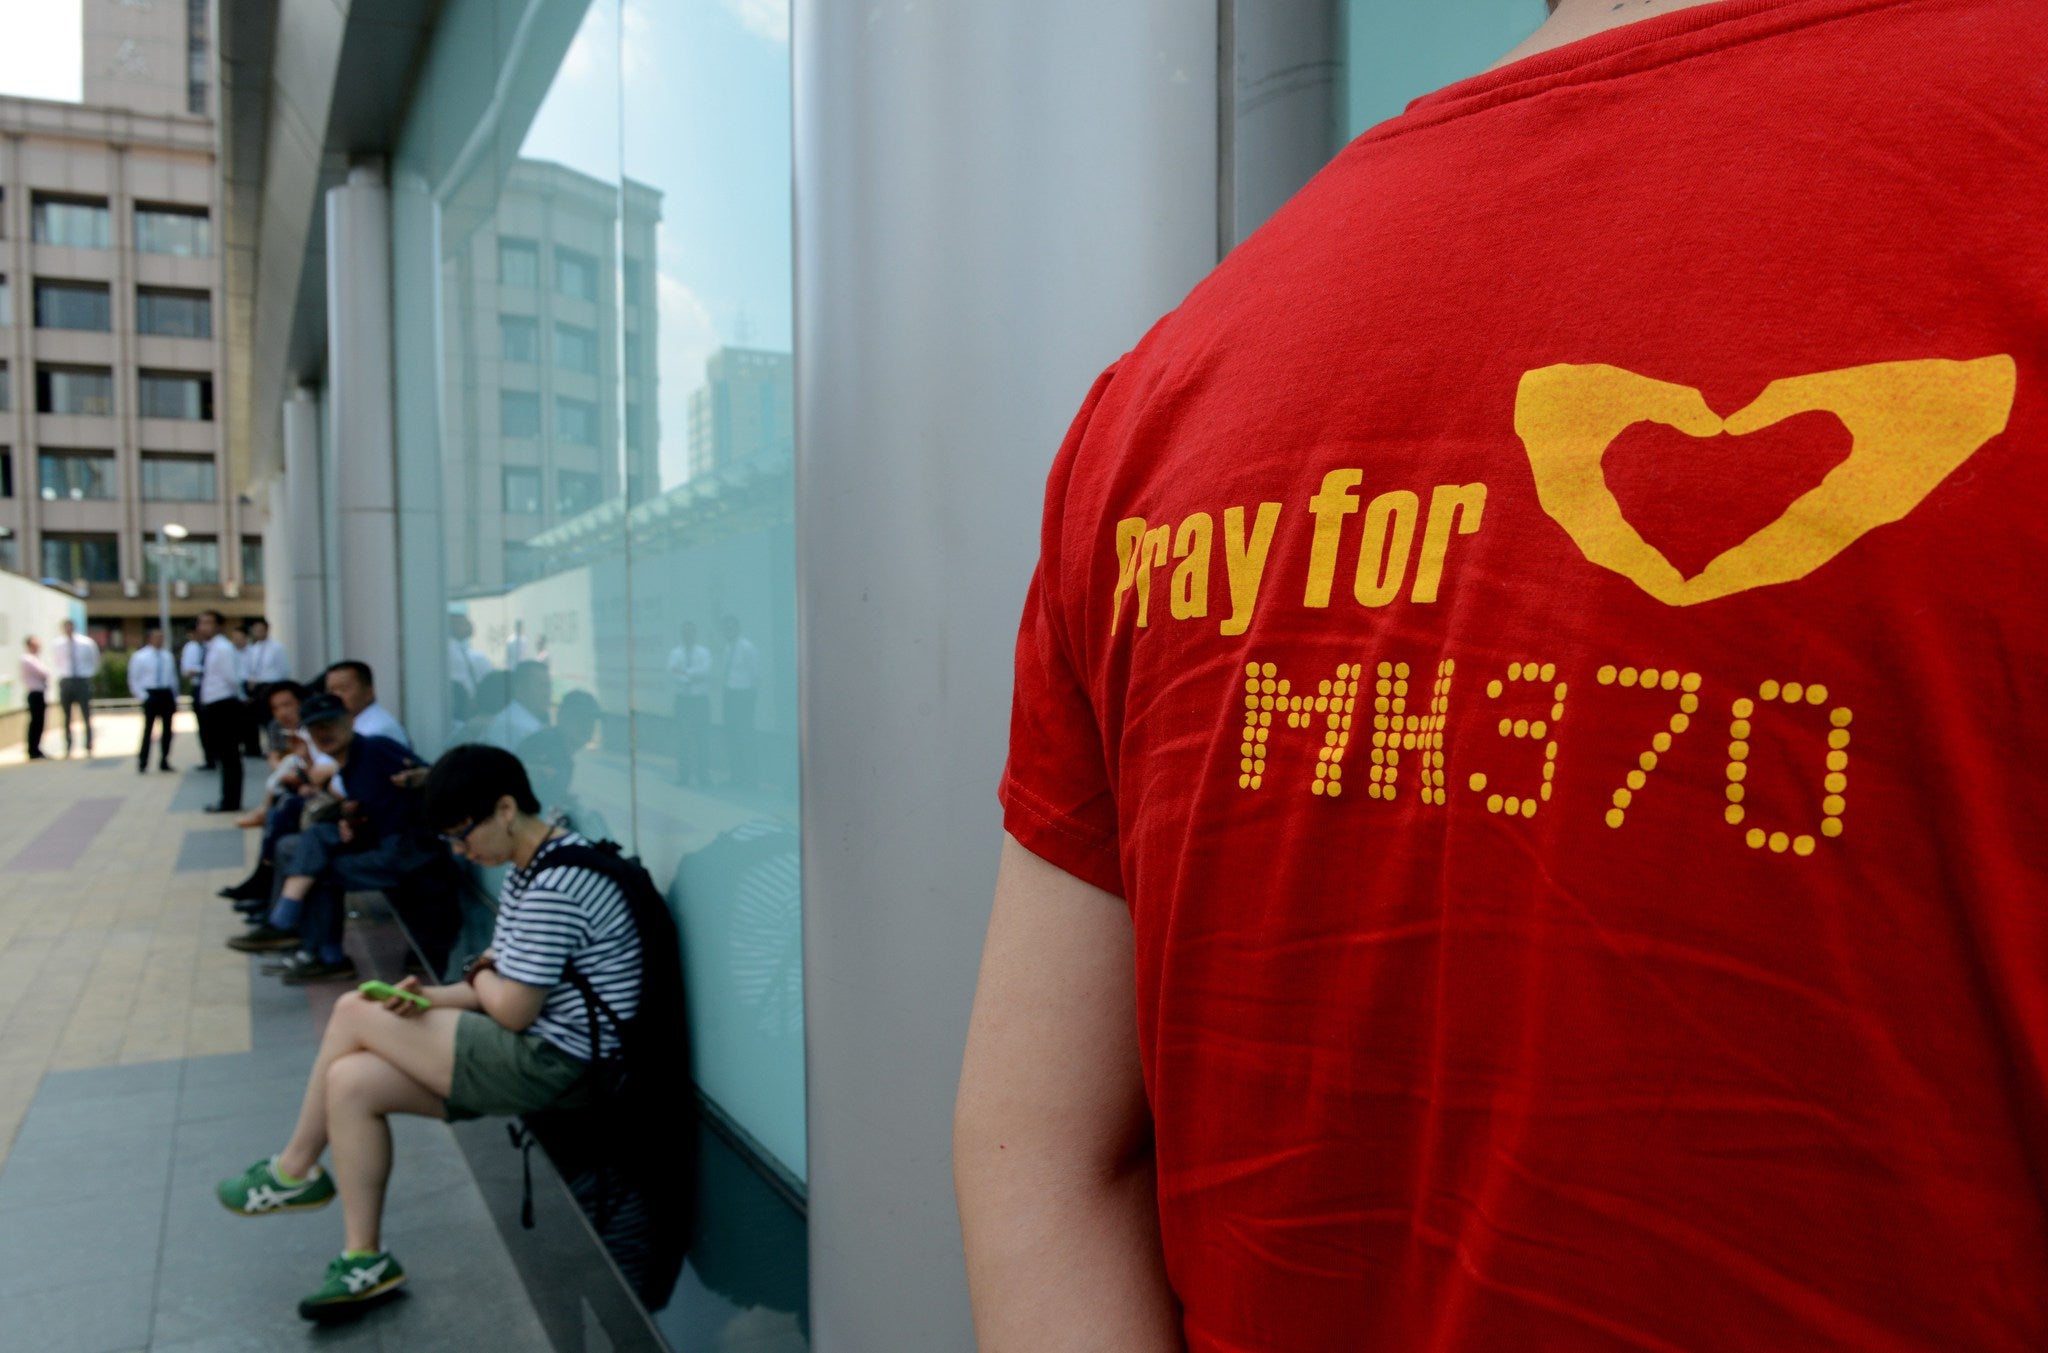 The families of the passengers on missing flight MH370 have begun receiving initial compensation payments